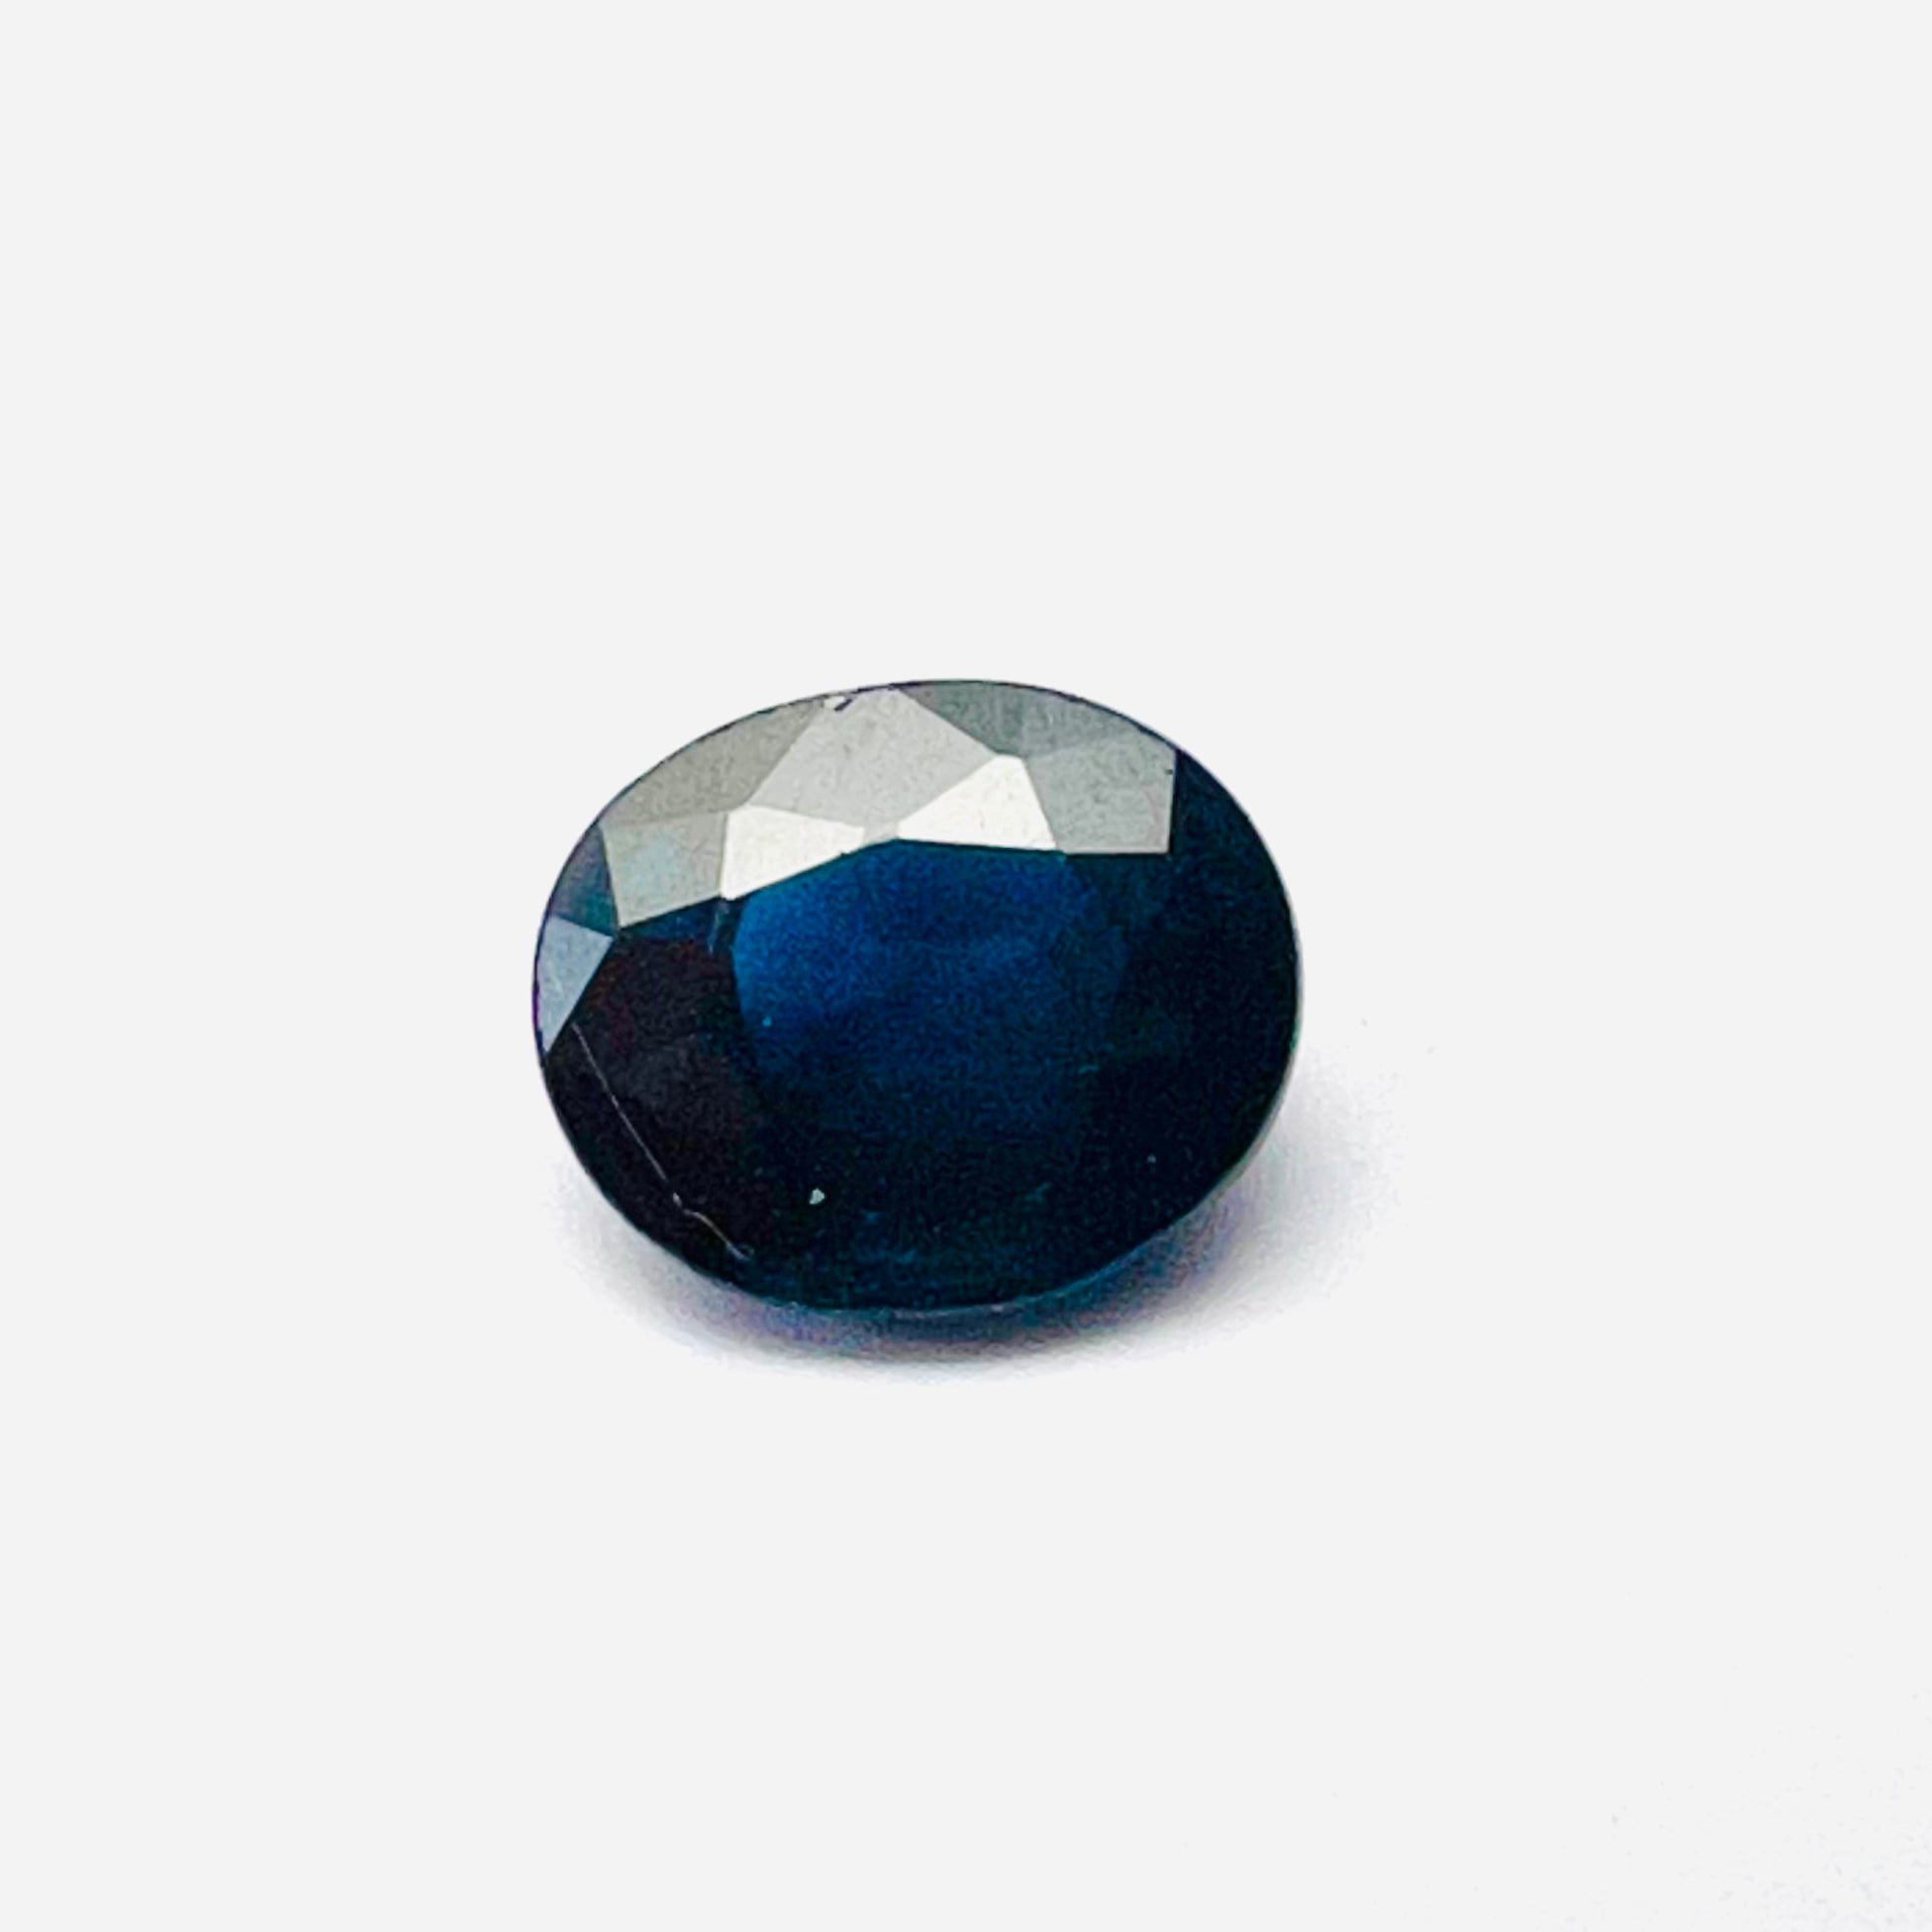 .91CTW Loose Oval Blue Sapphire 6.16x5.12x3.36mm Earth mined Gemstone